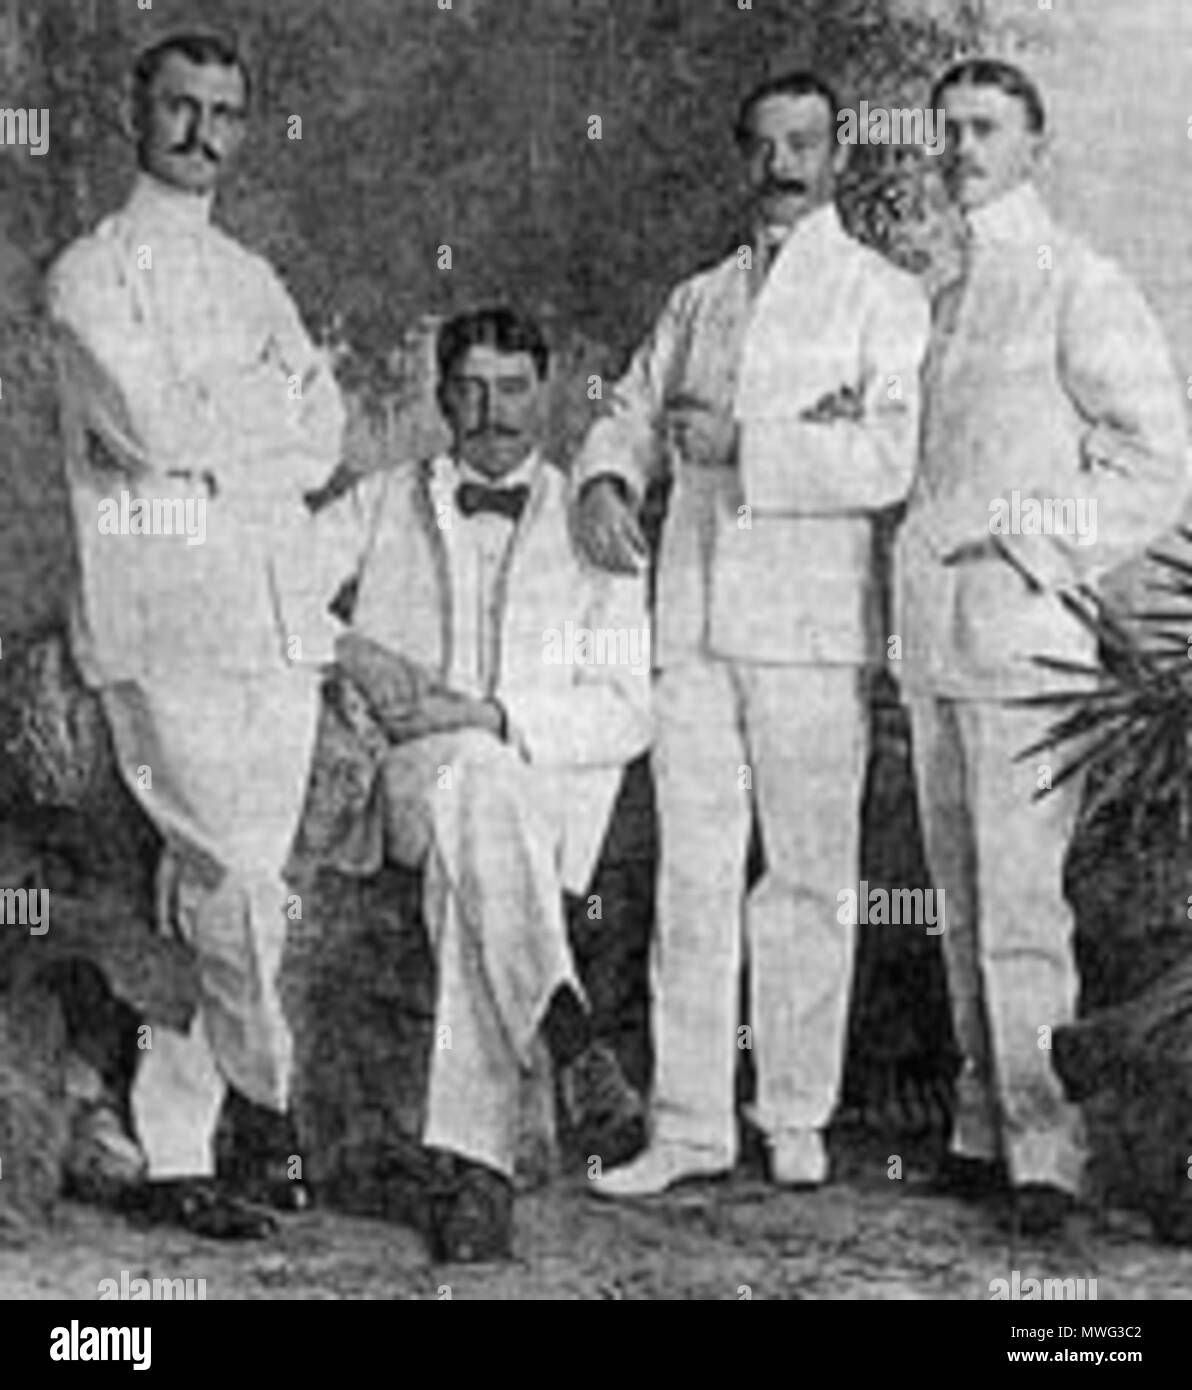 . English: Explorers and ethnographers Hiram M. Hiller, Jr. (far left), William H. Furness, III, and Alfred C. Harrison, Jr., along with Lewis Etzel, Furness' assistant. Sources appear to differ as to whether Furness or Etzel is seated. Photographed 1898 in Singapore. NOTE: The University of Pennsylvania Museum of Archaeology and Anthropology lists the figures as (left to right): Hiller, Etzel (seated), Furness, Harrison.[1] Français : Hiller (à gauche), Furness et Harrison, en compagnie de Lewis Etzel, l'assistant de Furness. Photographie prise à Singapour en1898 . 1898. Unknown 278 Hiller-Fu Stock Photo